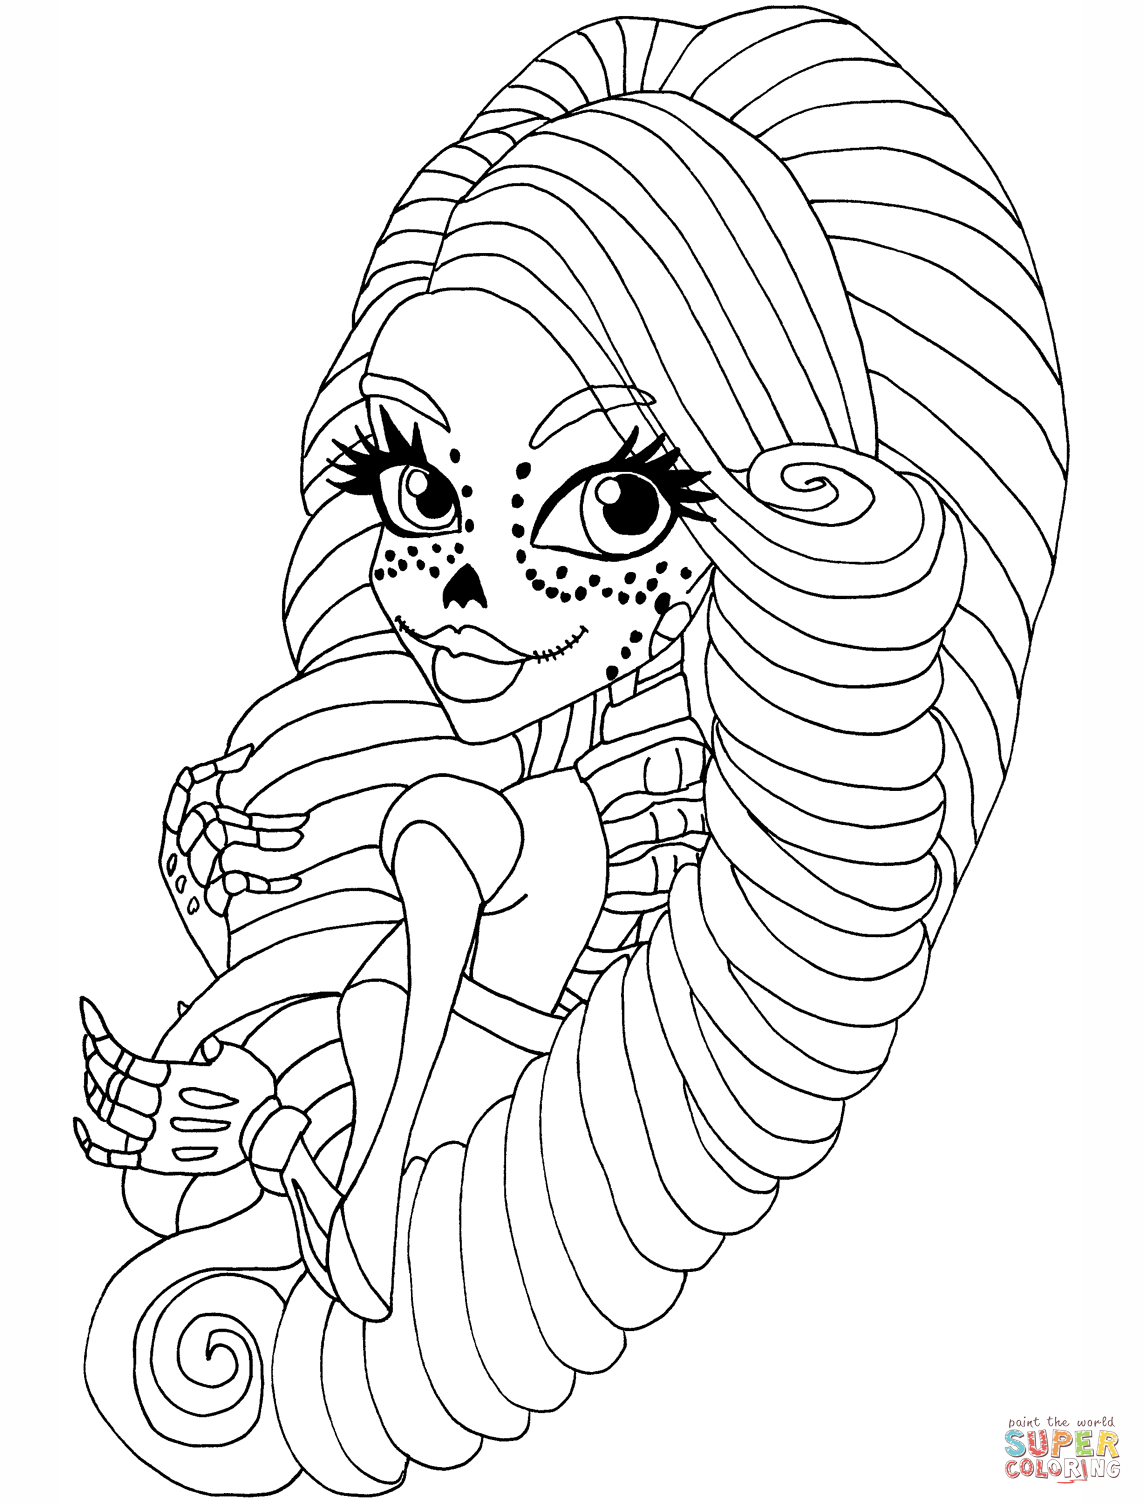 Top 10 Printable Super Monster Coloring Pages